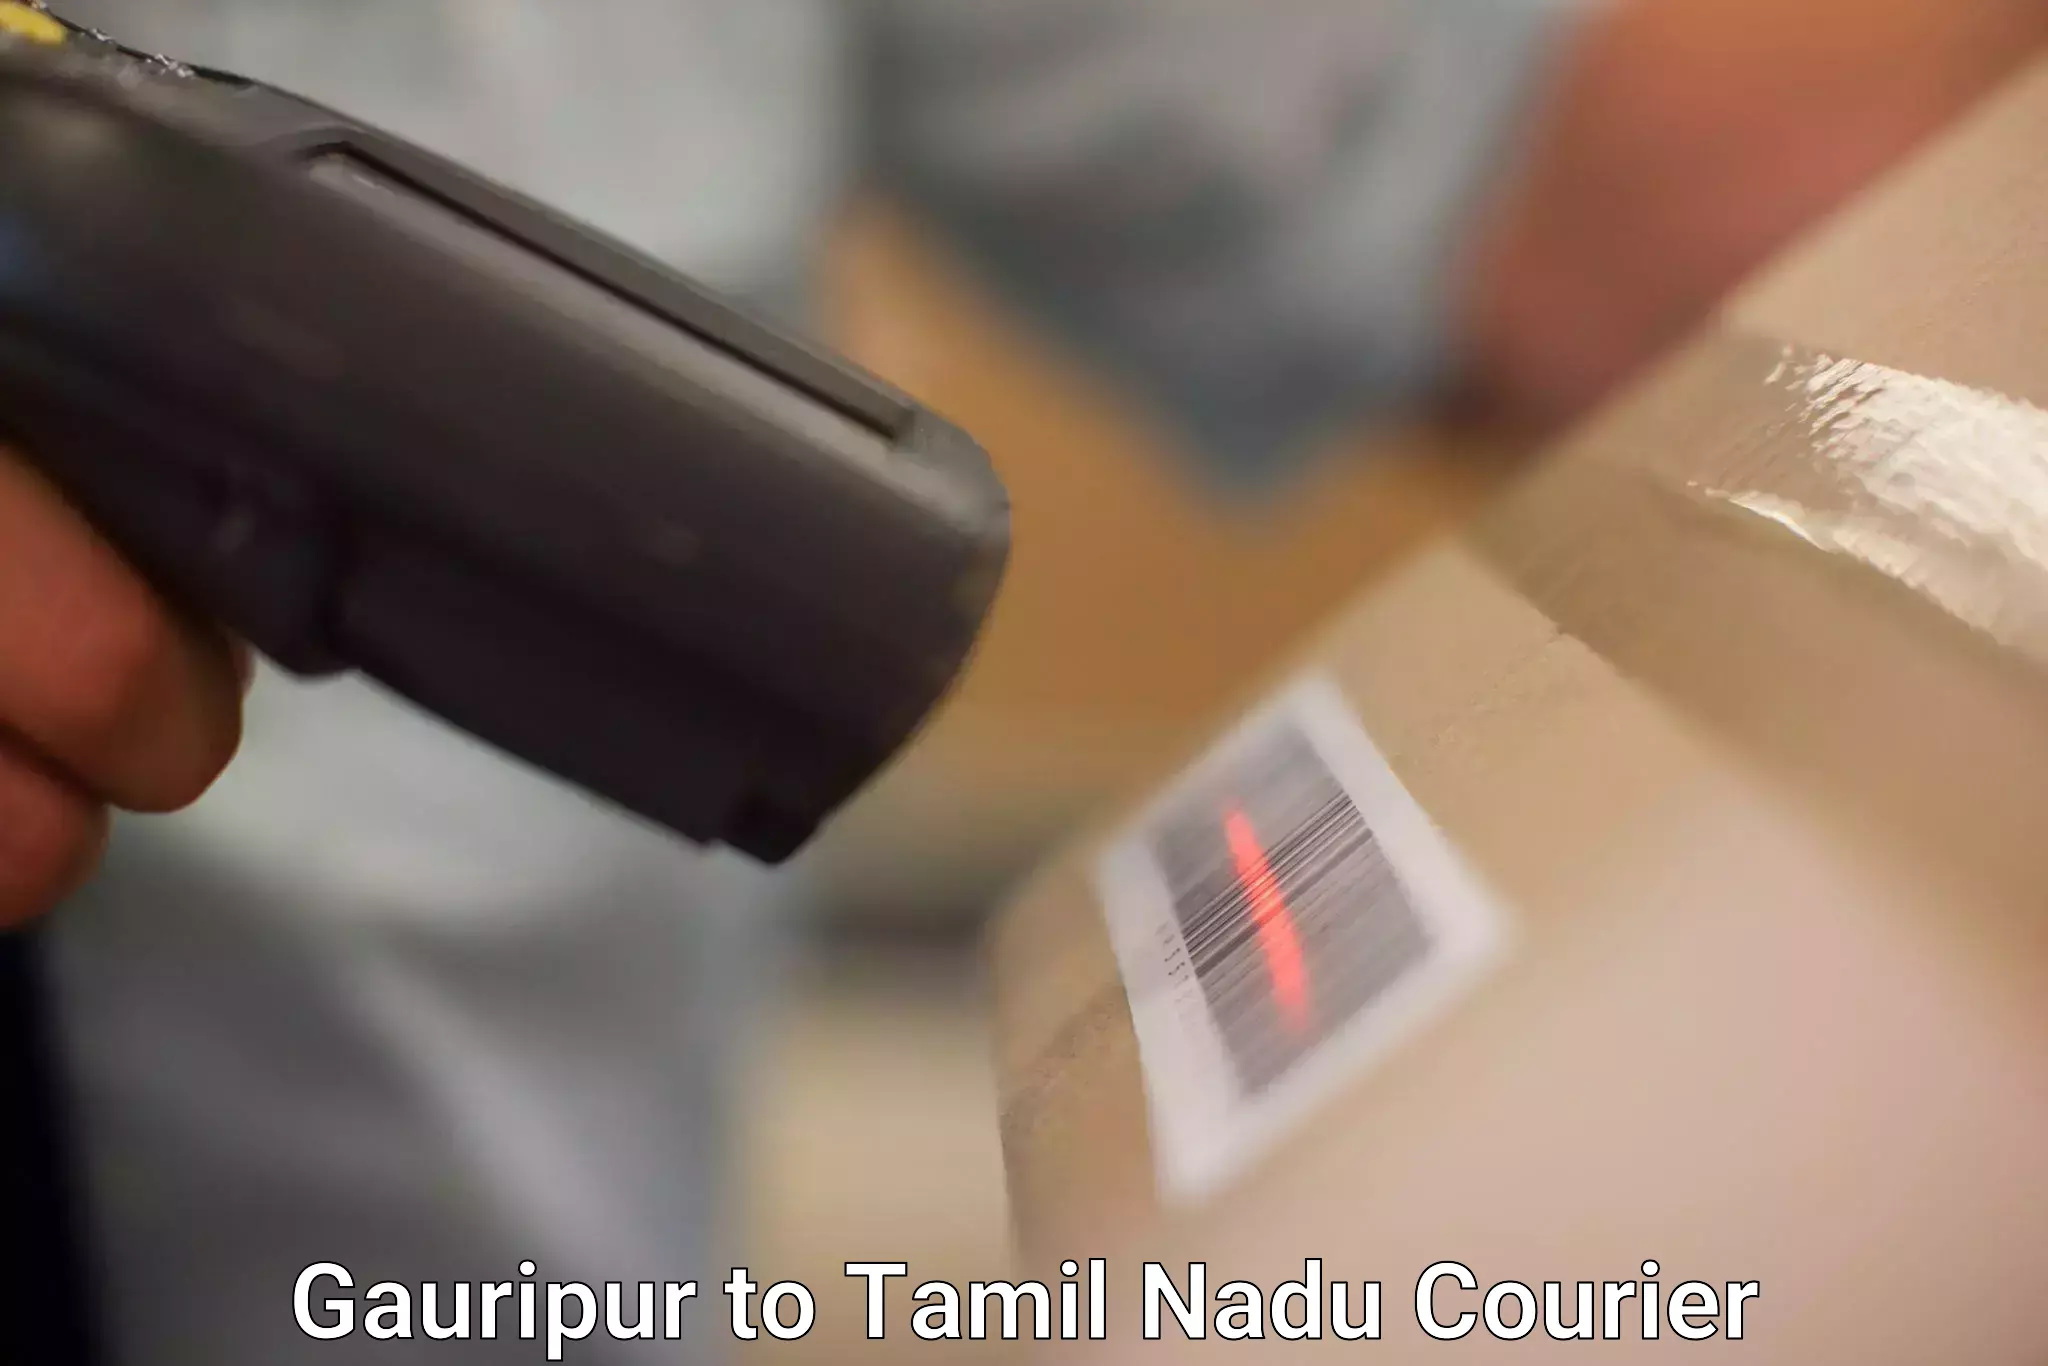 Fast-track shipping solutions Gauripur to Vallioor